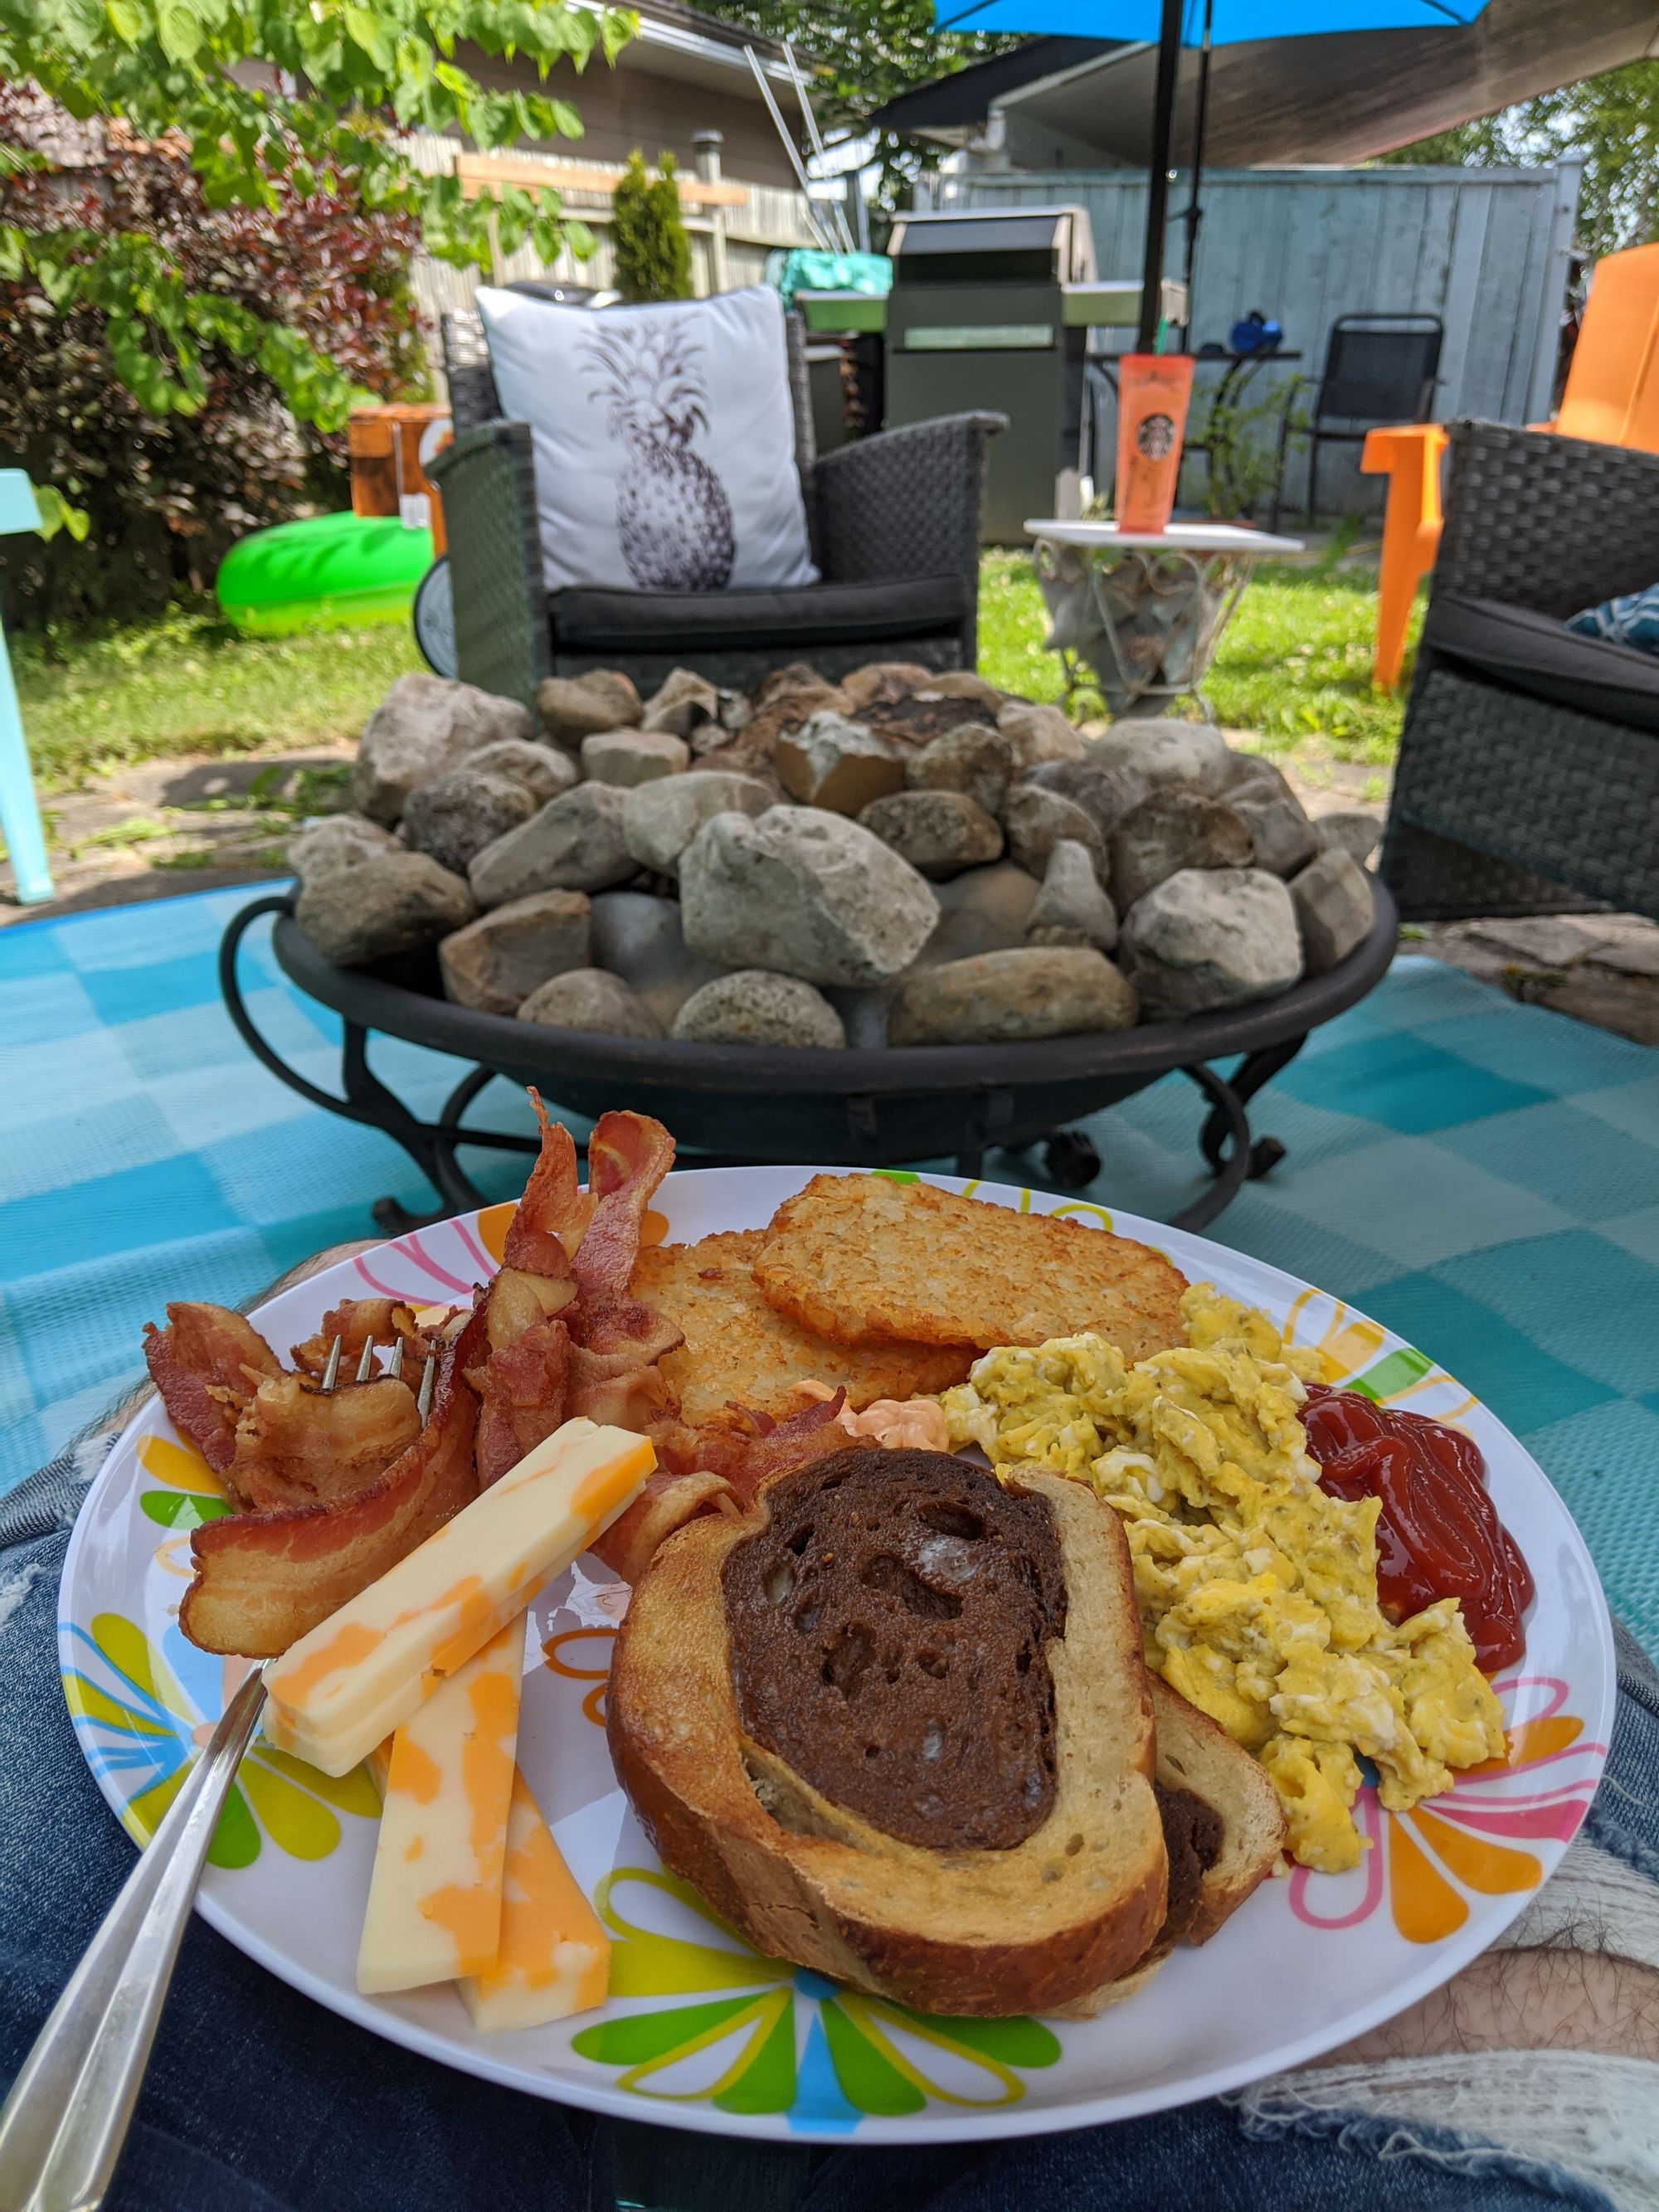 A plate of breakfast food sitting on my lap. In the background behind it a firepit filled with rocks and some patio furniture.